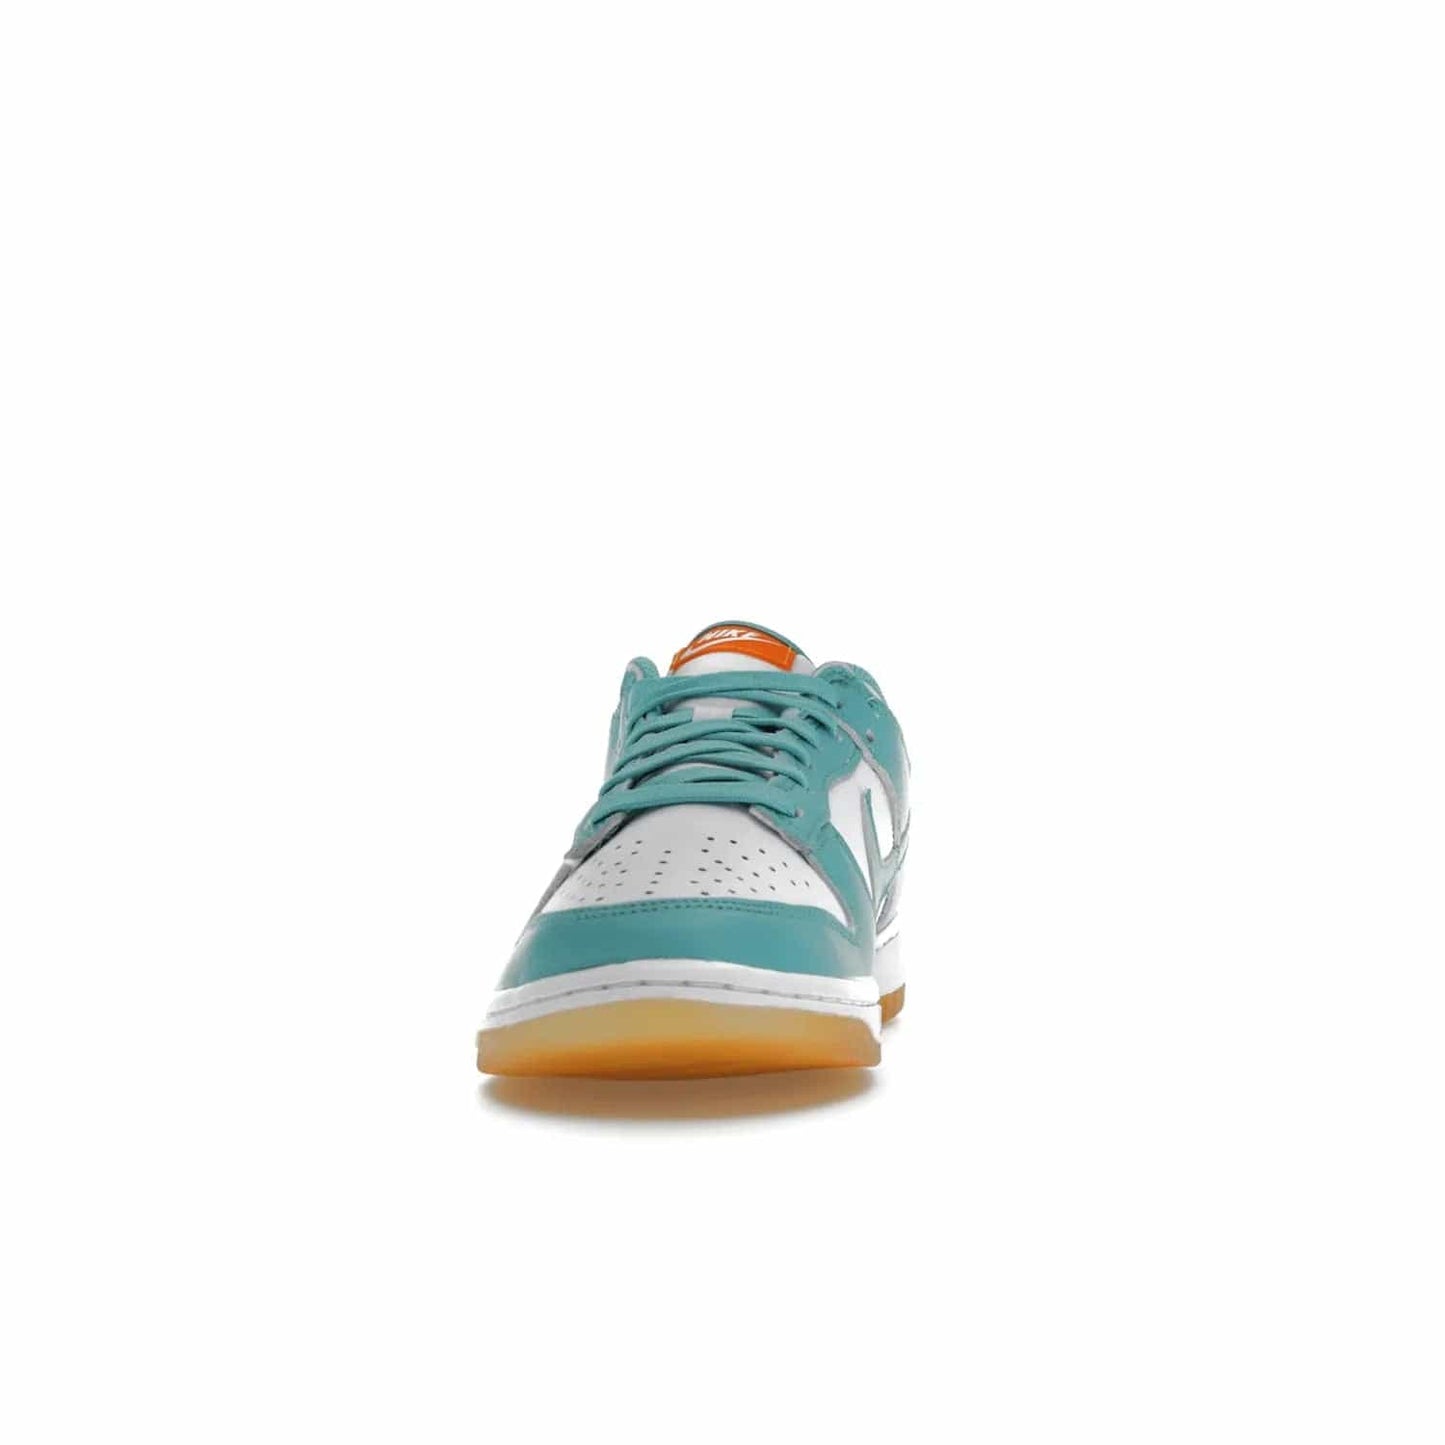 Nike Dunk Low Teal Zeal (Women's) - Image 11 - Only at www.BallersClubKickz.com - A white leather upper with teal overlays and Swooshes, plus yellow and embroidered accents make the Nike Dunk Low Teal Zeal (Women's) the perfect statement piece for any wardrobe.